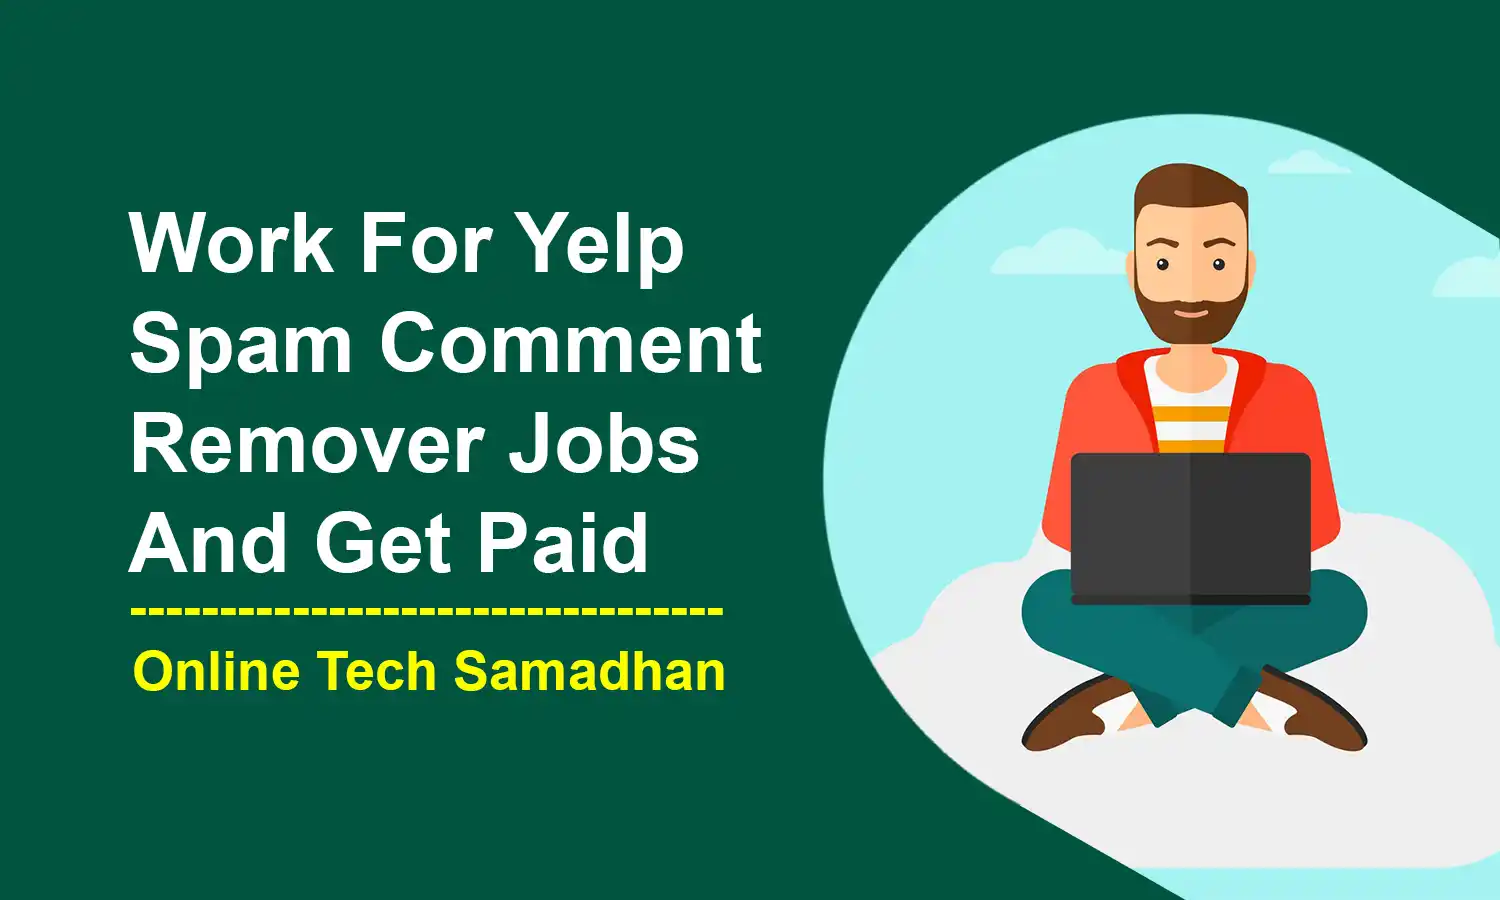 Yelp Spam Comment Remover Jobs